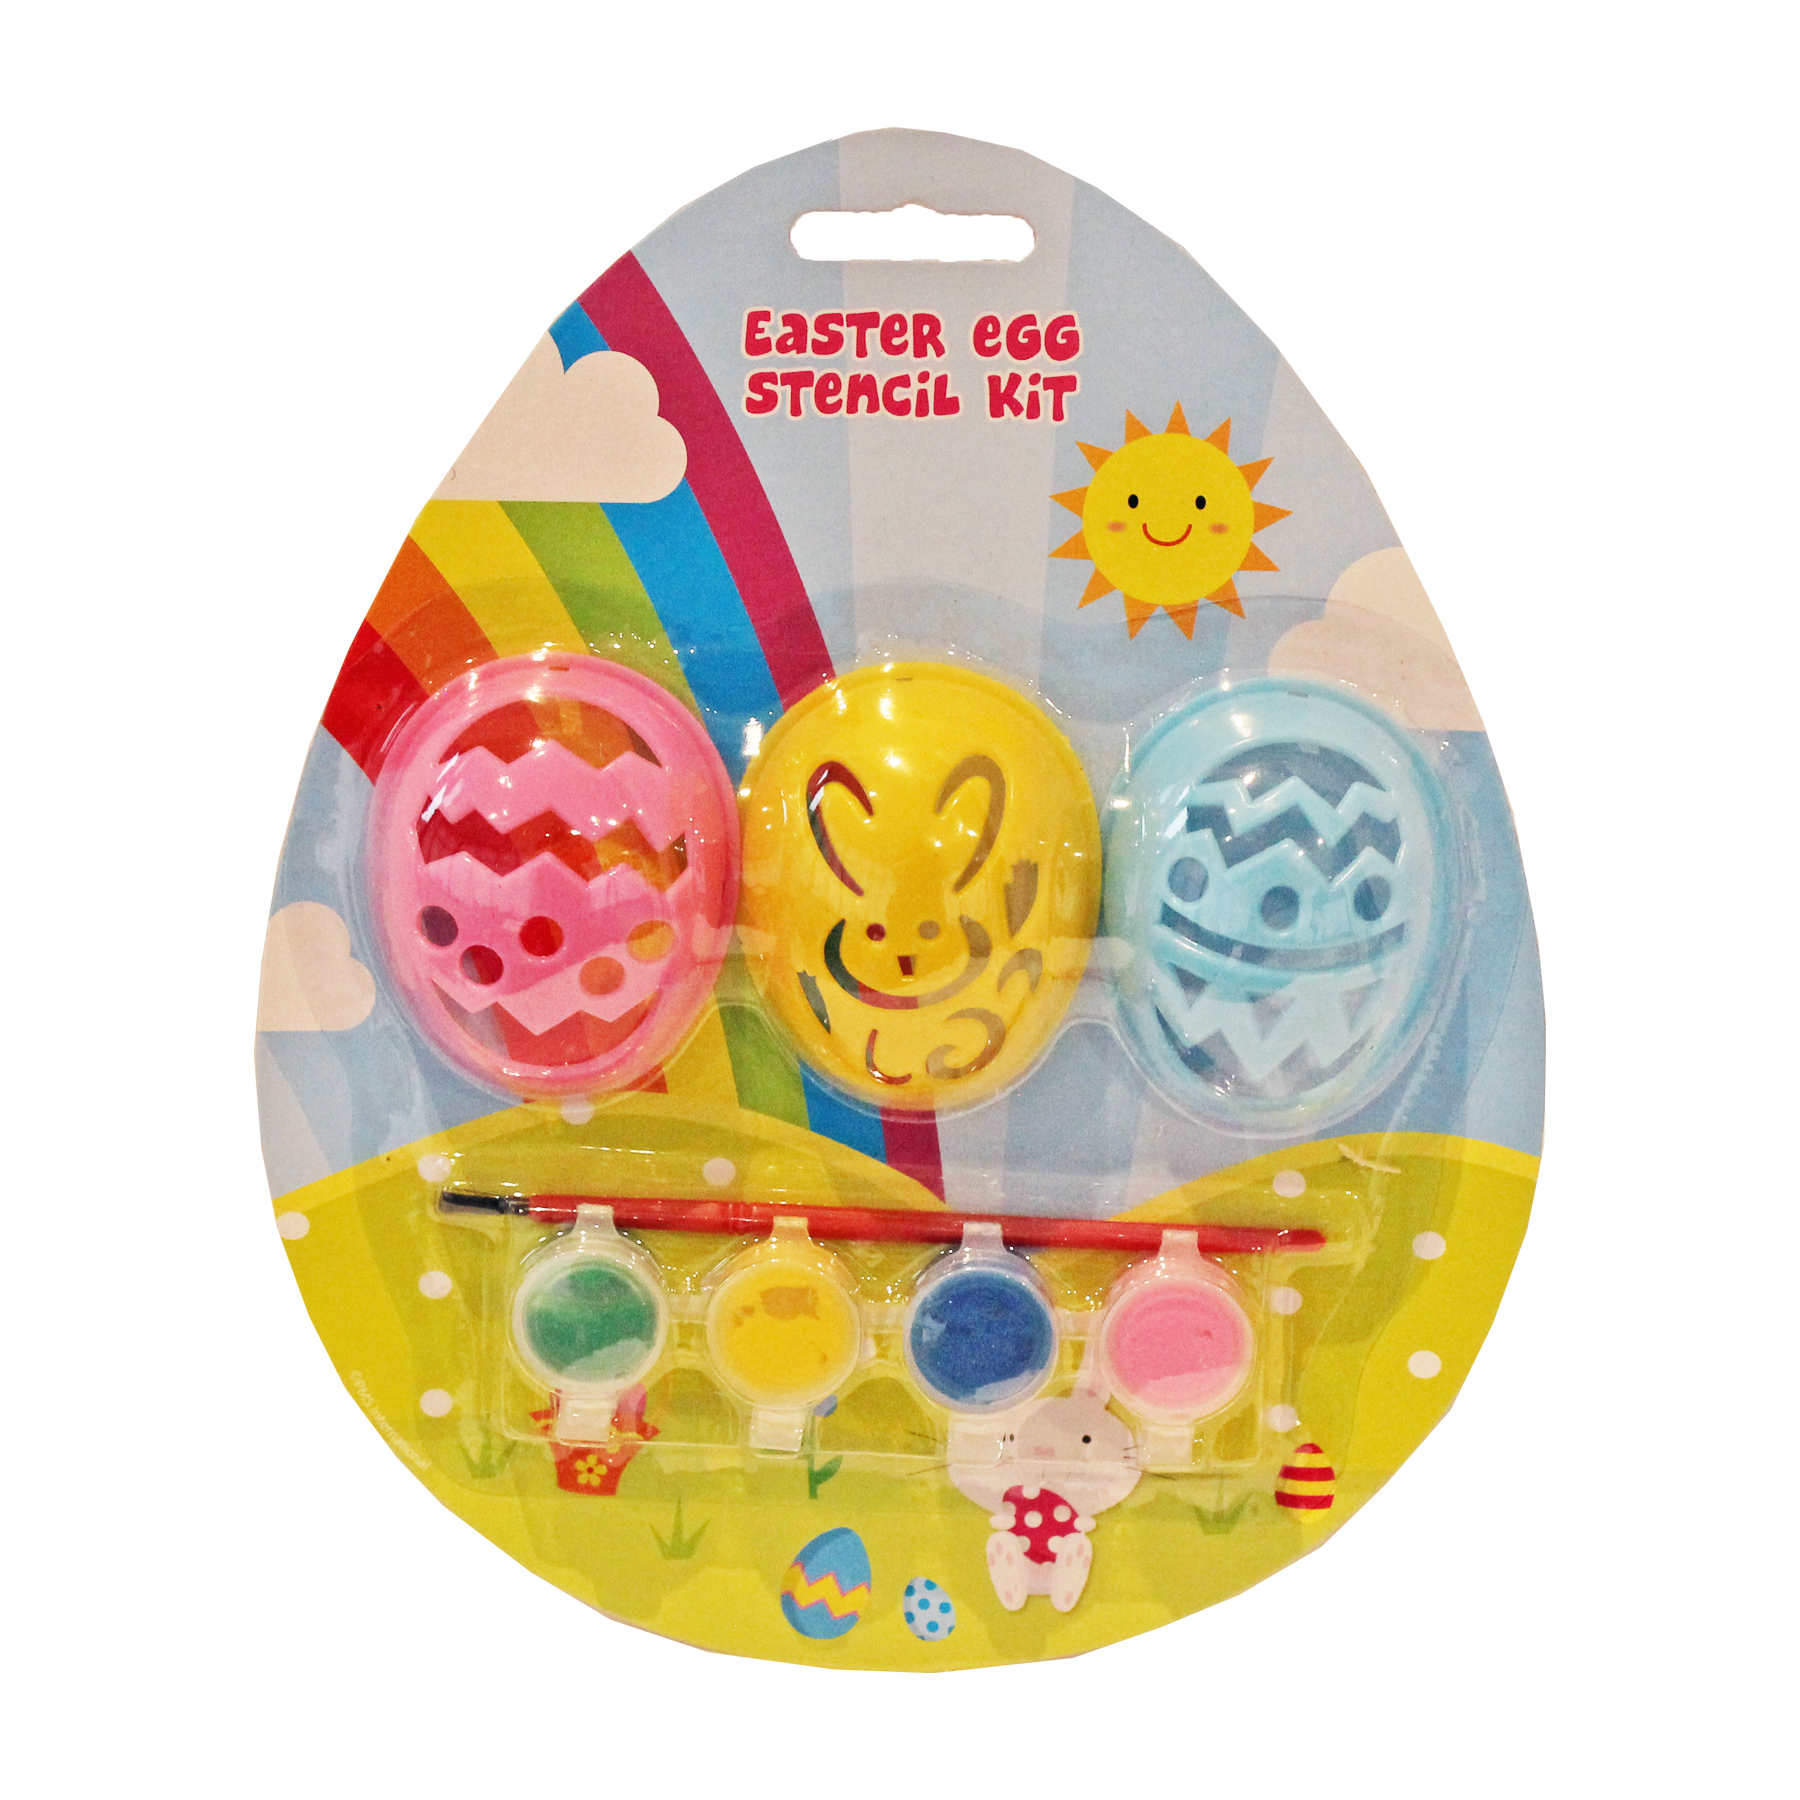 Easter Arts and Crafts Children Activities - Egg Stencil Kit